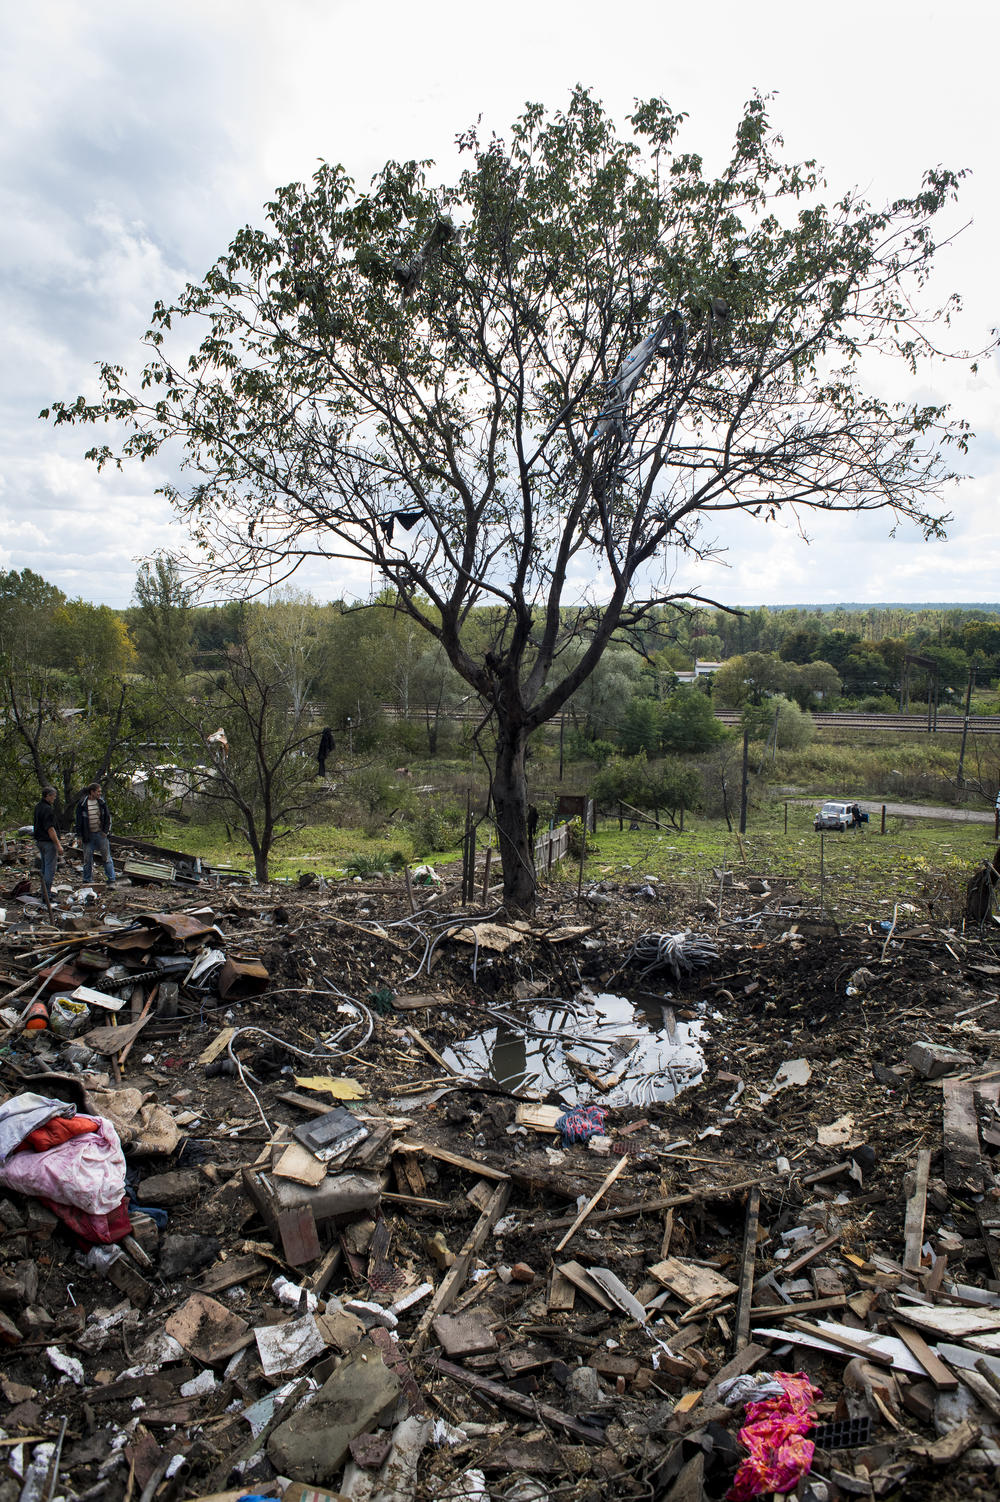 A crater and field of debris are all that remain on Sept. 24 at the site of an explosion that killed 11-year-old Anastasiya Grycenko in Chuhuiv, Ukraine.